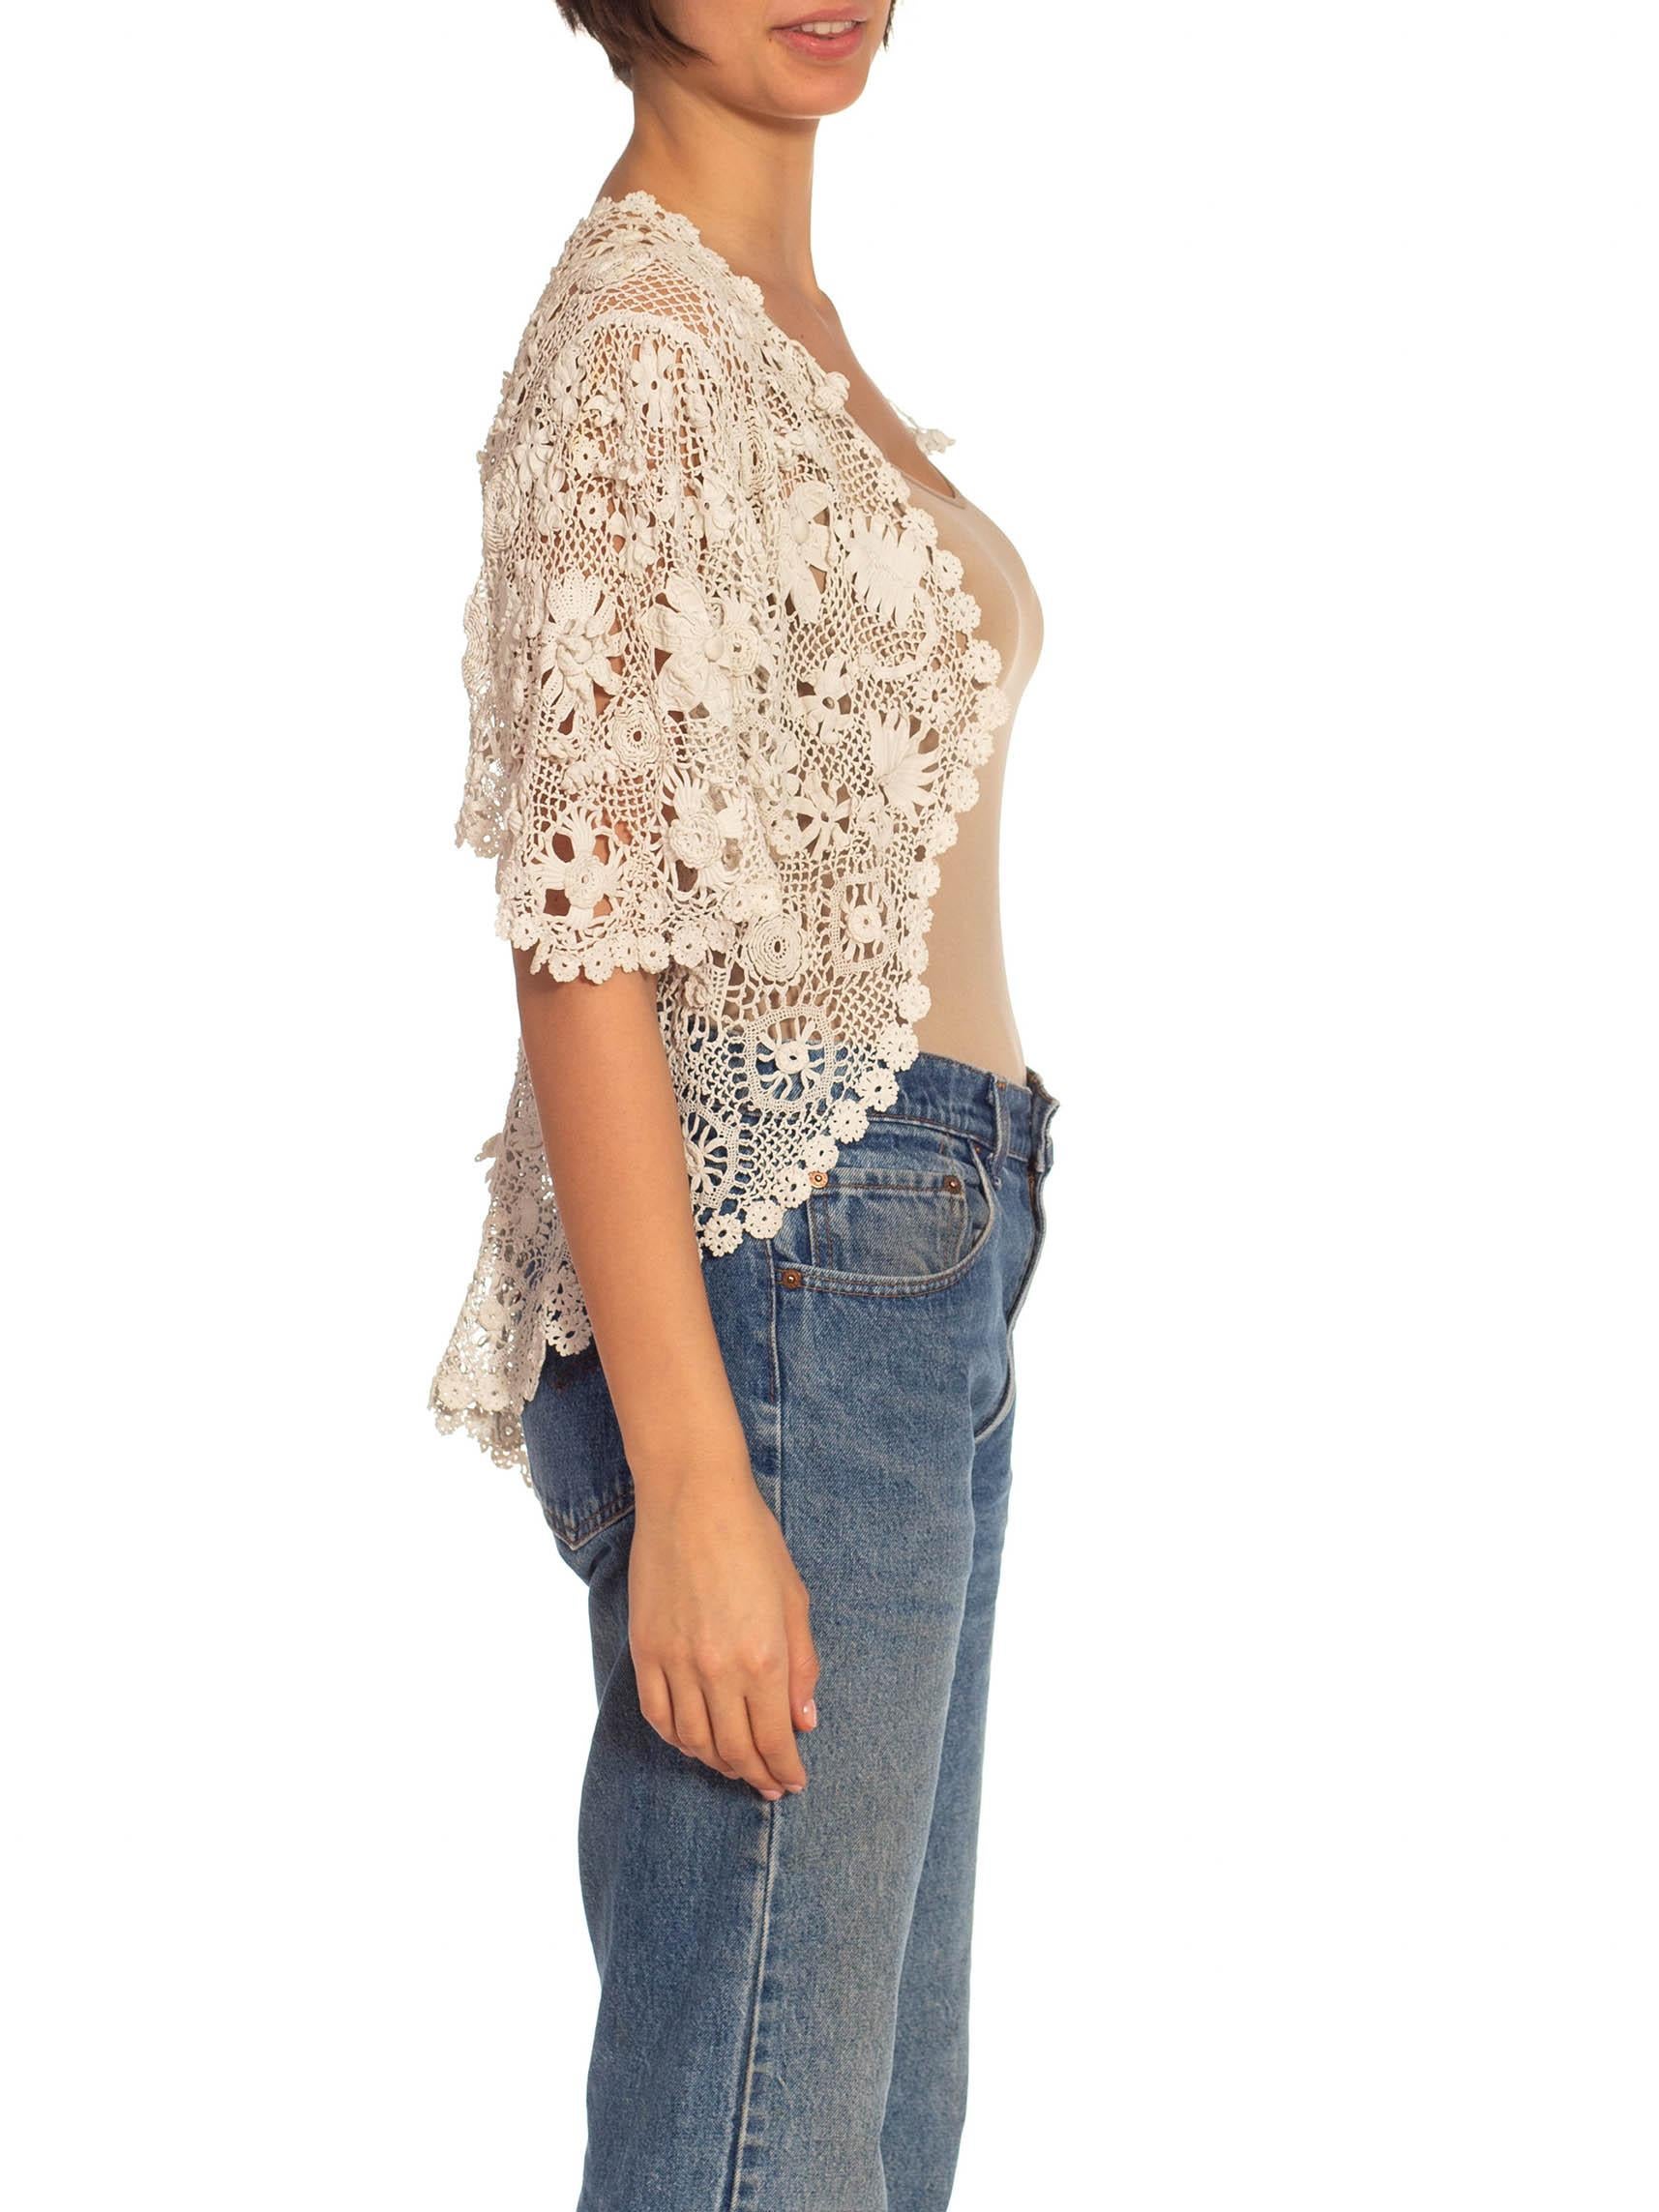 Victorian White Irish Crochet Jacket With Short Sleeves For Sale 1